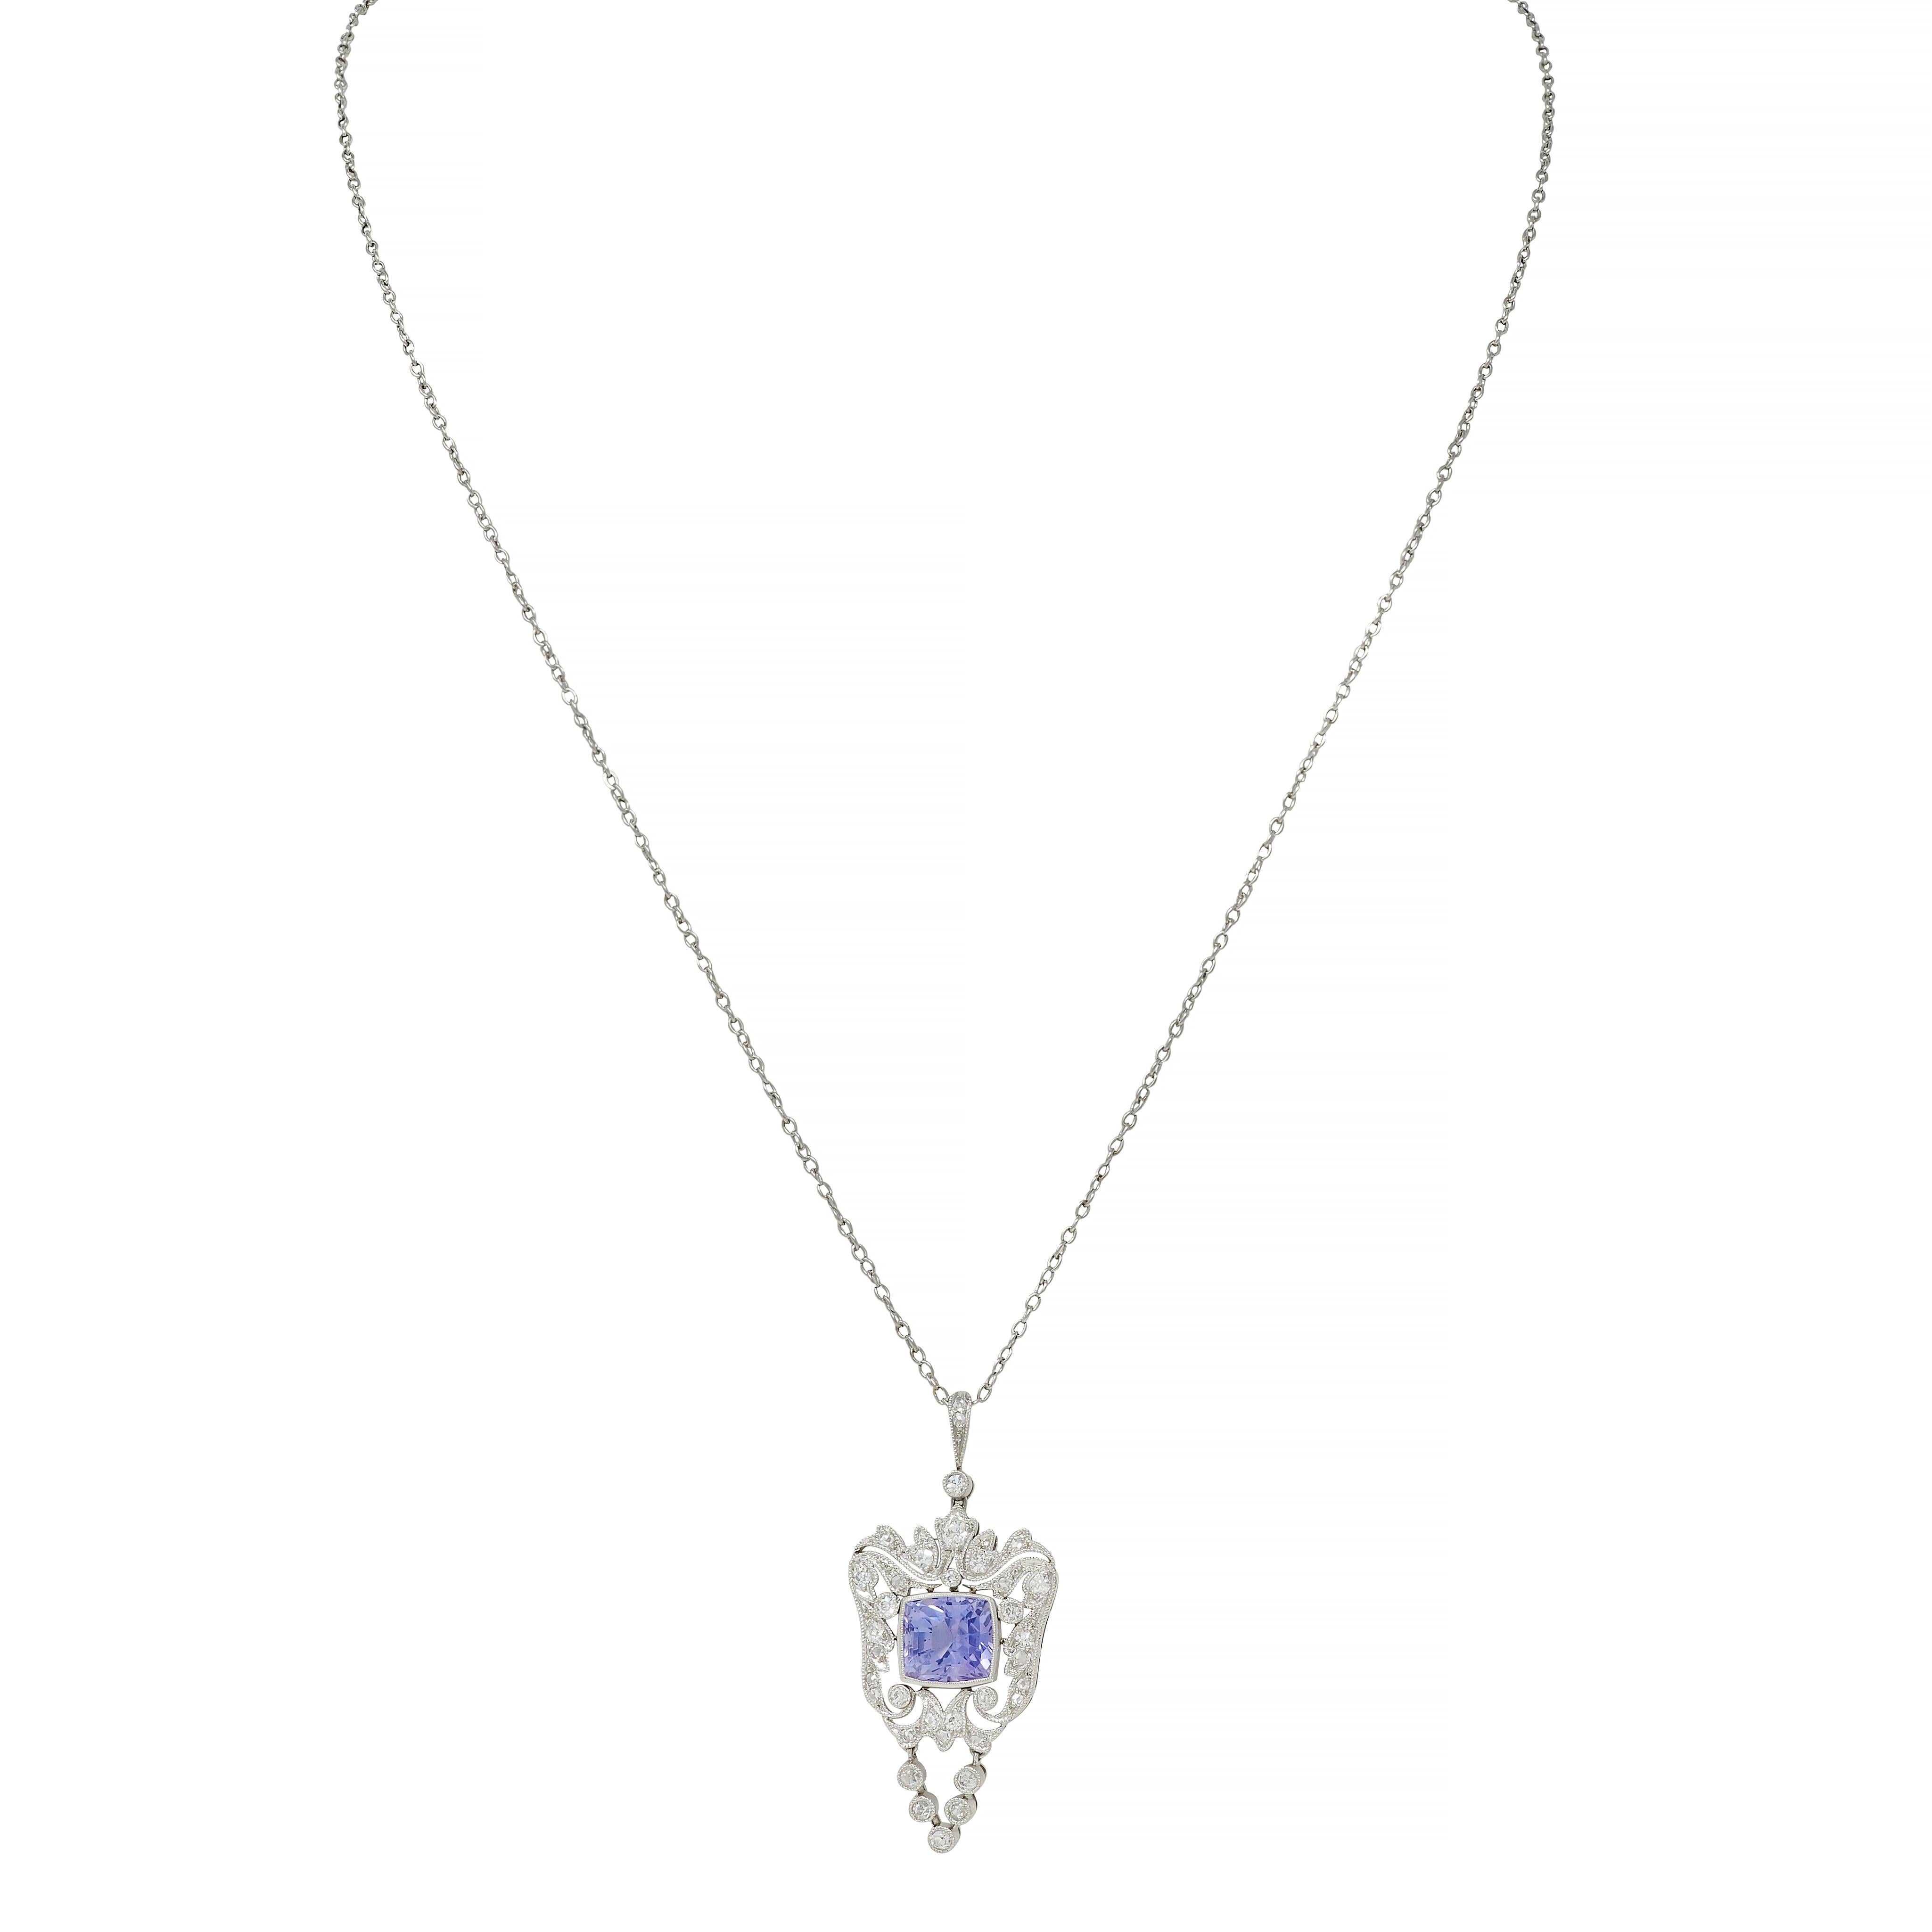 Platinum cable chain necklace suspends ornate milgrain pendant
Centering a mixed cushion cut Ceylon sapphire weighing approximately 3.04 carats
Transparent and medium light purple in color with no indications of heat - Sri Lankan in origin
Bezel set